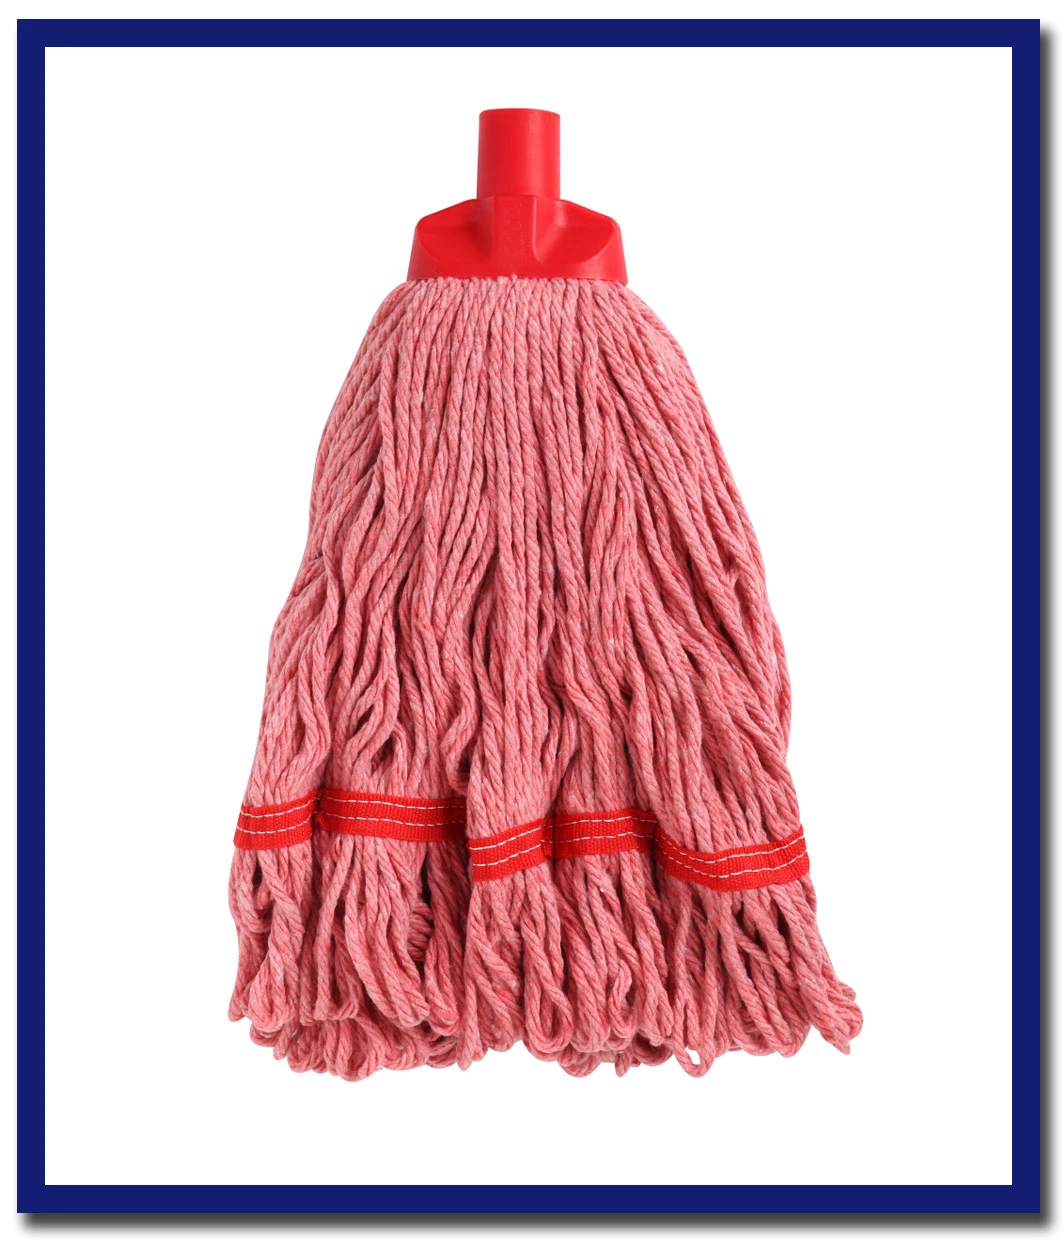 Edco Enduro Round Mop - Stone Doctor Australia - Cleaning Accessories > Tools > Cotton Mops